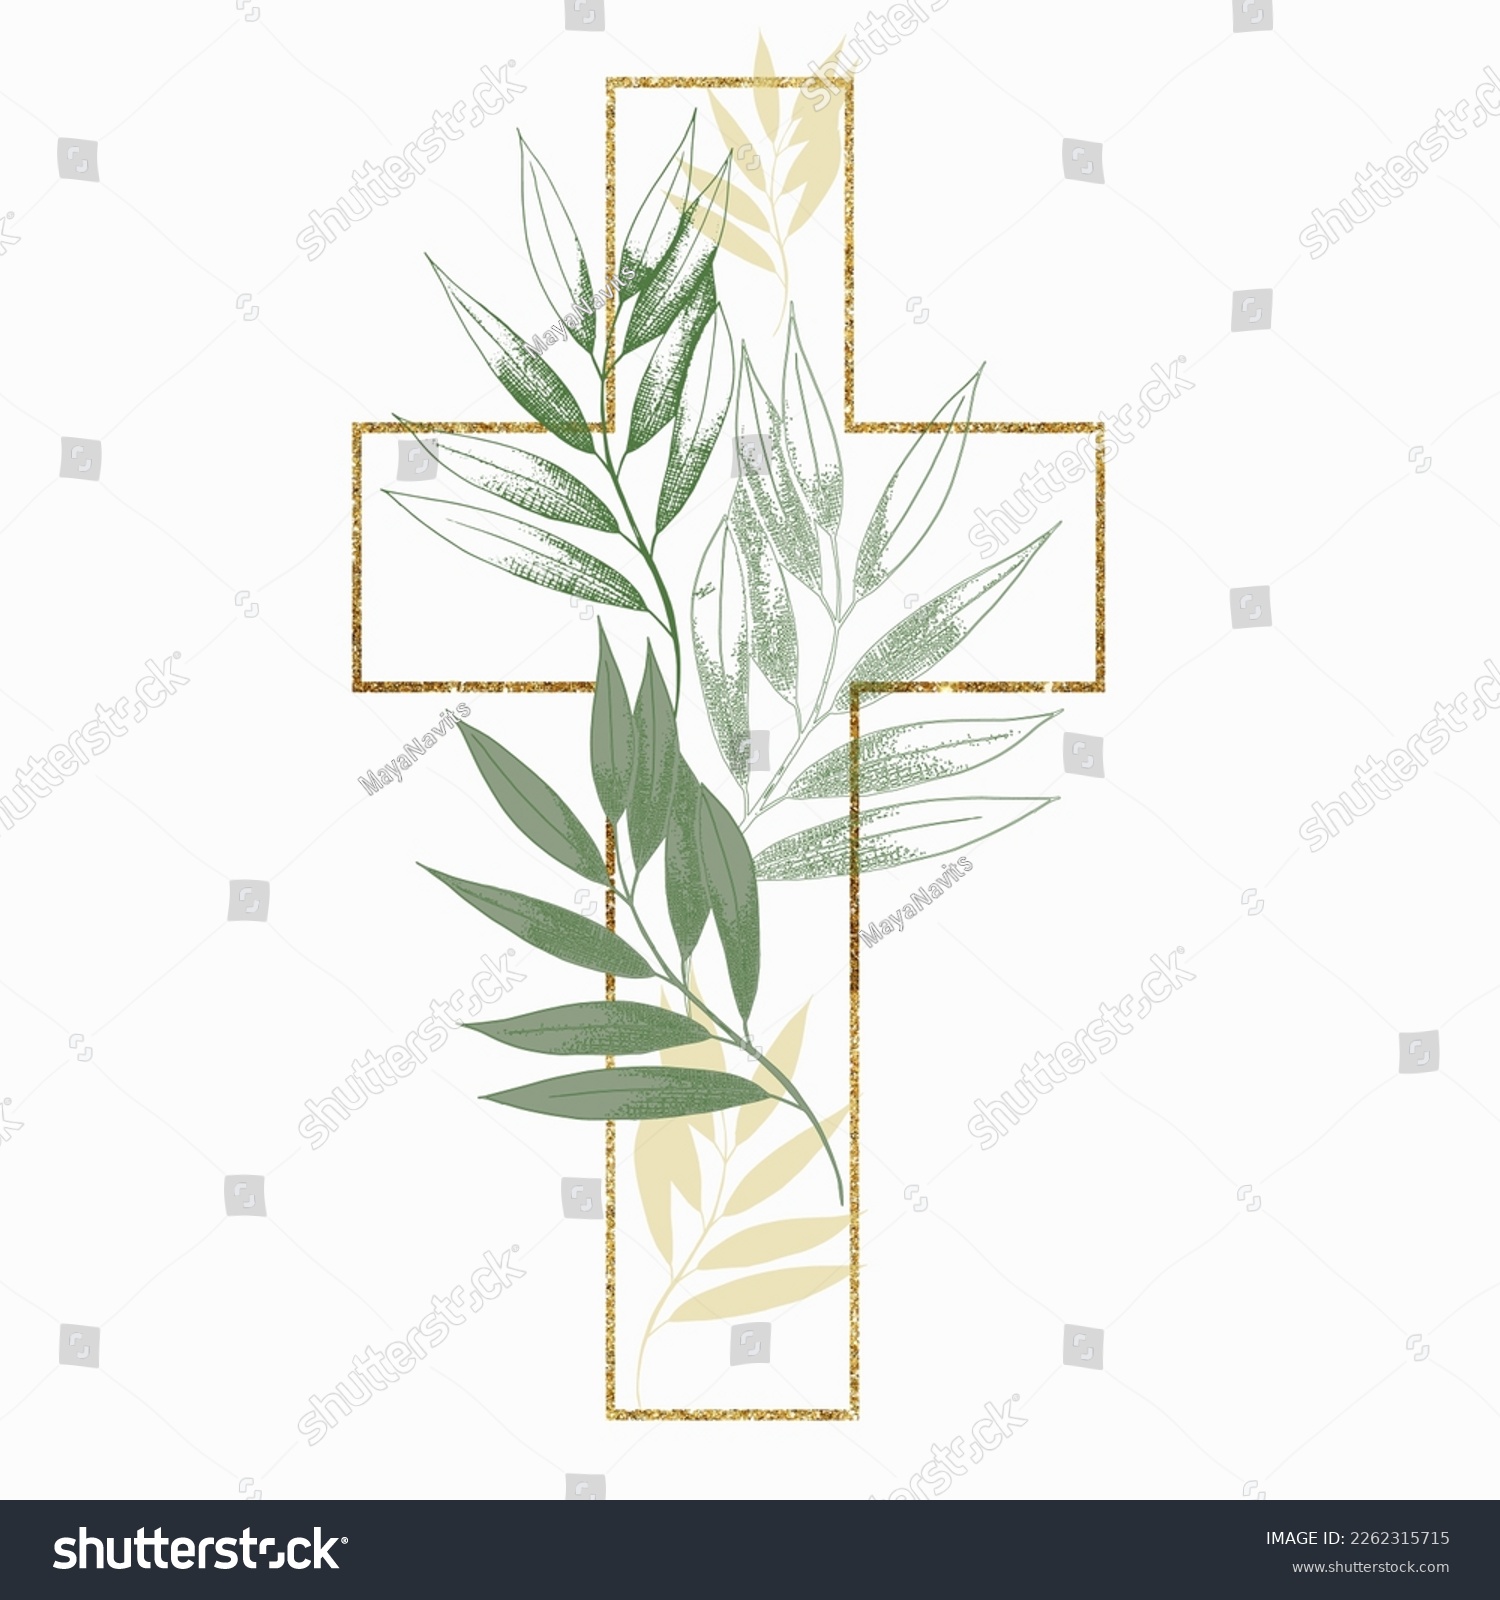 Graphic Easter Cross Clipart, Spring Floral Arrangements, Baptism Crosses DIY Invitation, Vector Eucaliptus Greenery wedding clipart, Golden frame and foliage, Holy Spirit, Religious #2262315715